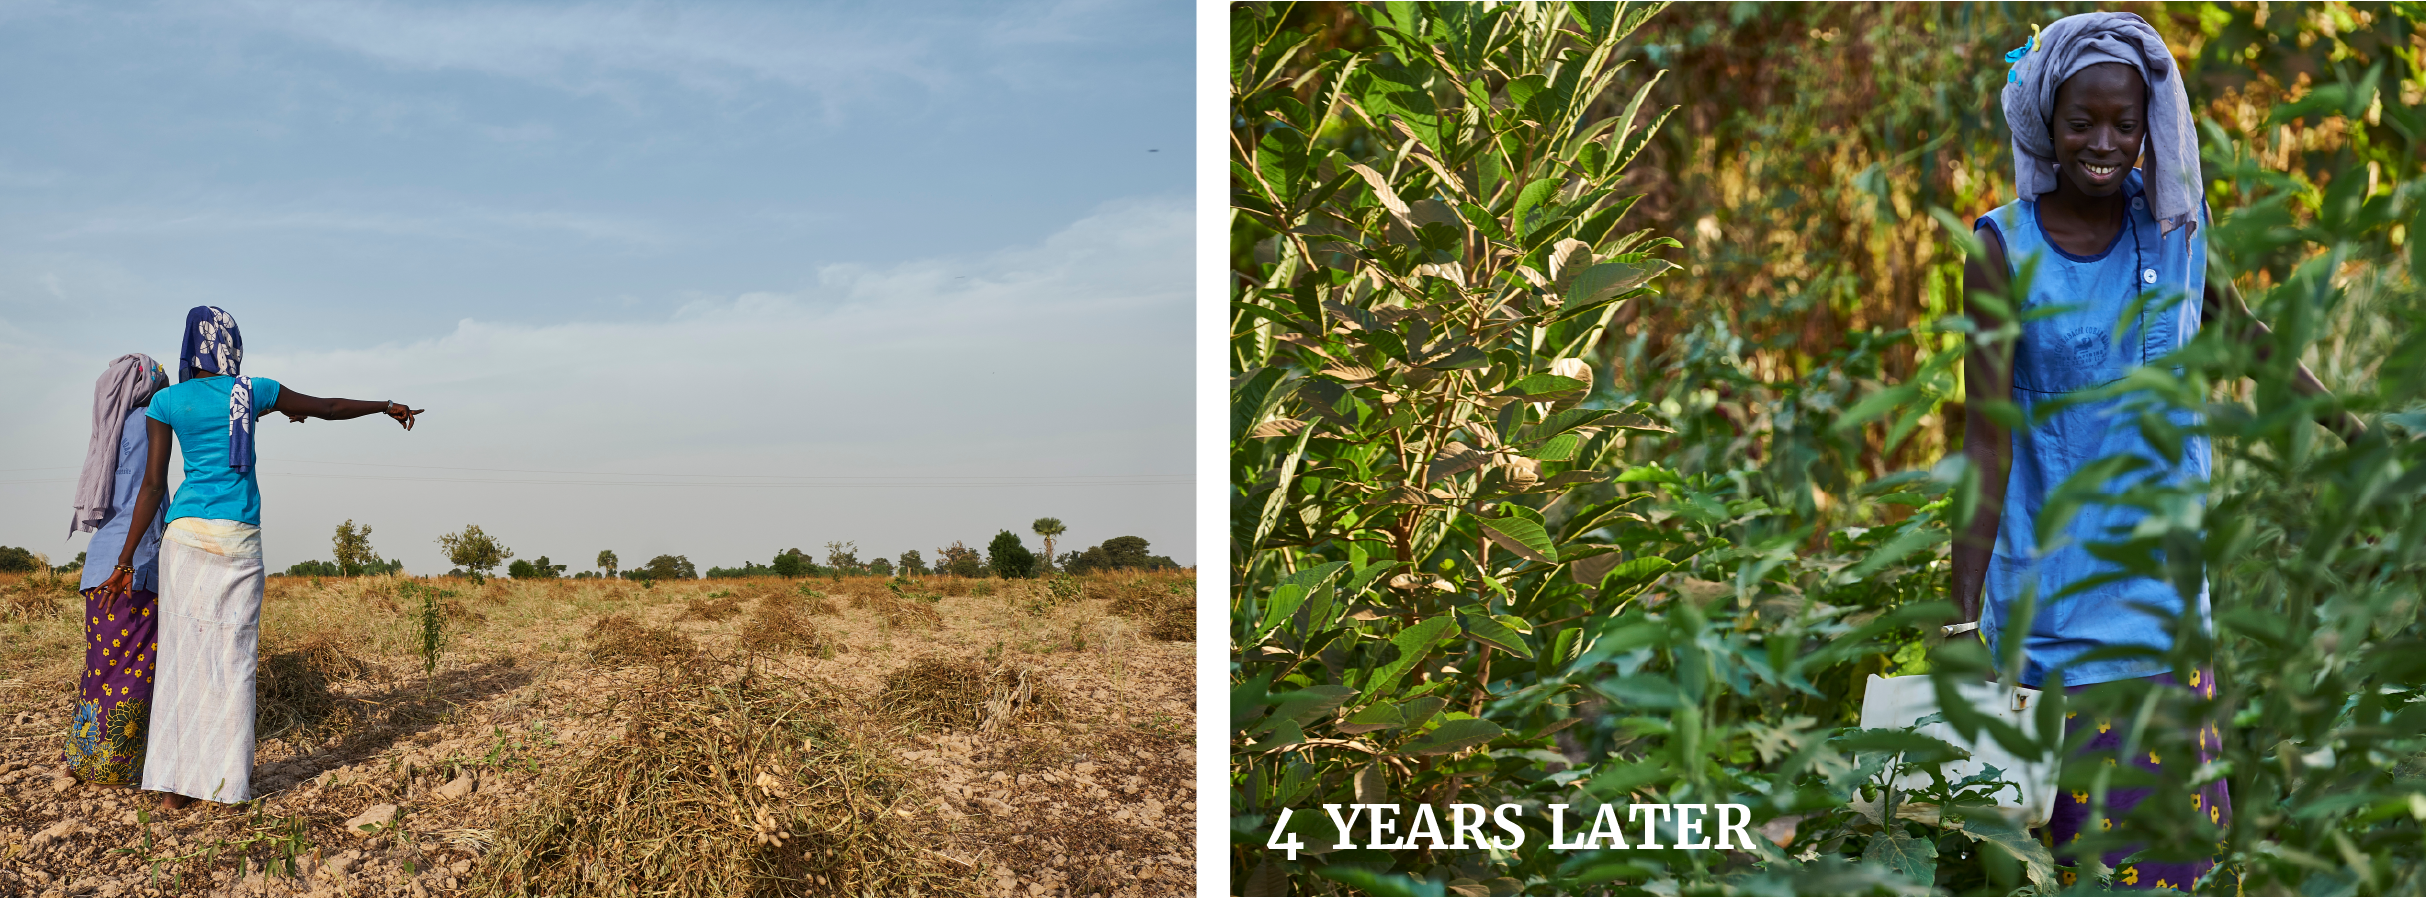 Monocrop agriculture is leaving farmers destitute. Diversification supports livelihoods and the environment. 
In four years, Trees for the Future helps farmers transform their land from unproductive strains on the environment to flourishing sources of income and biodiversity.